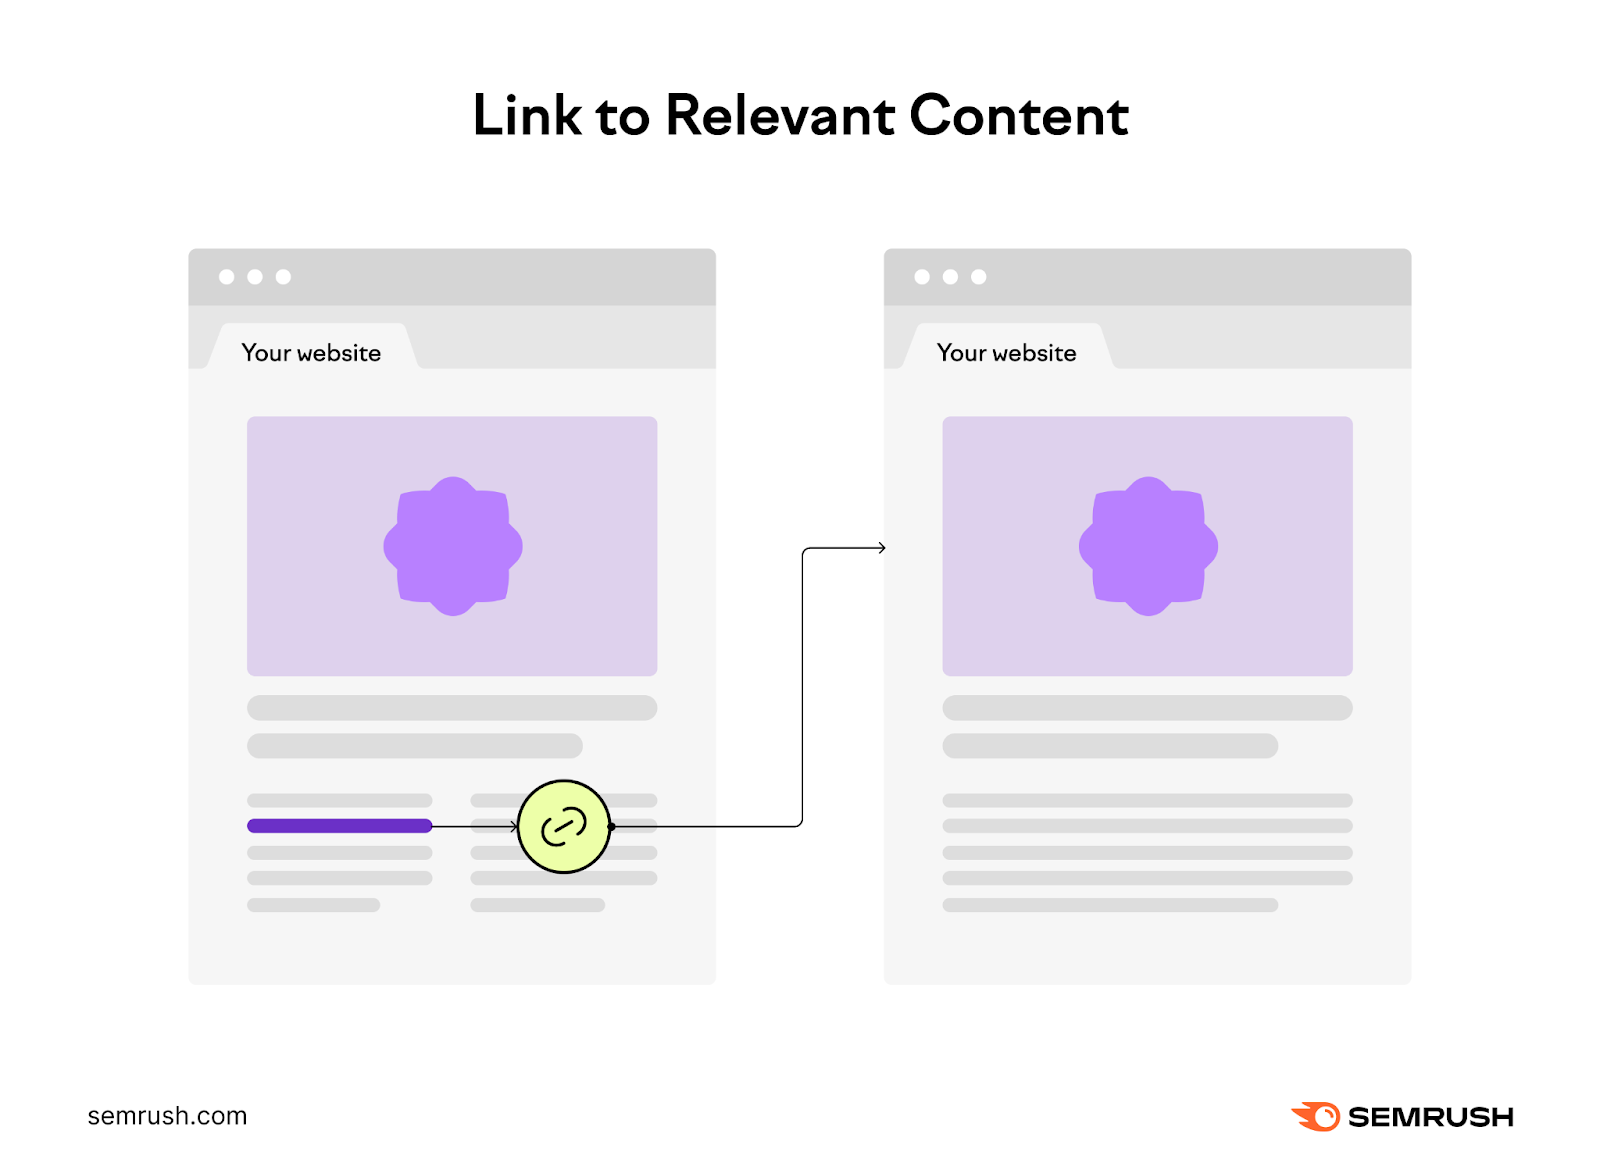 An infographic showing an internal link to a relevant content